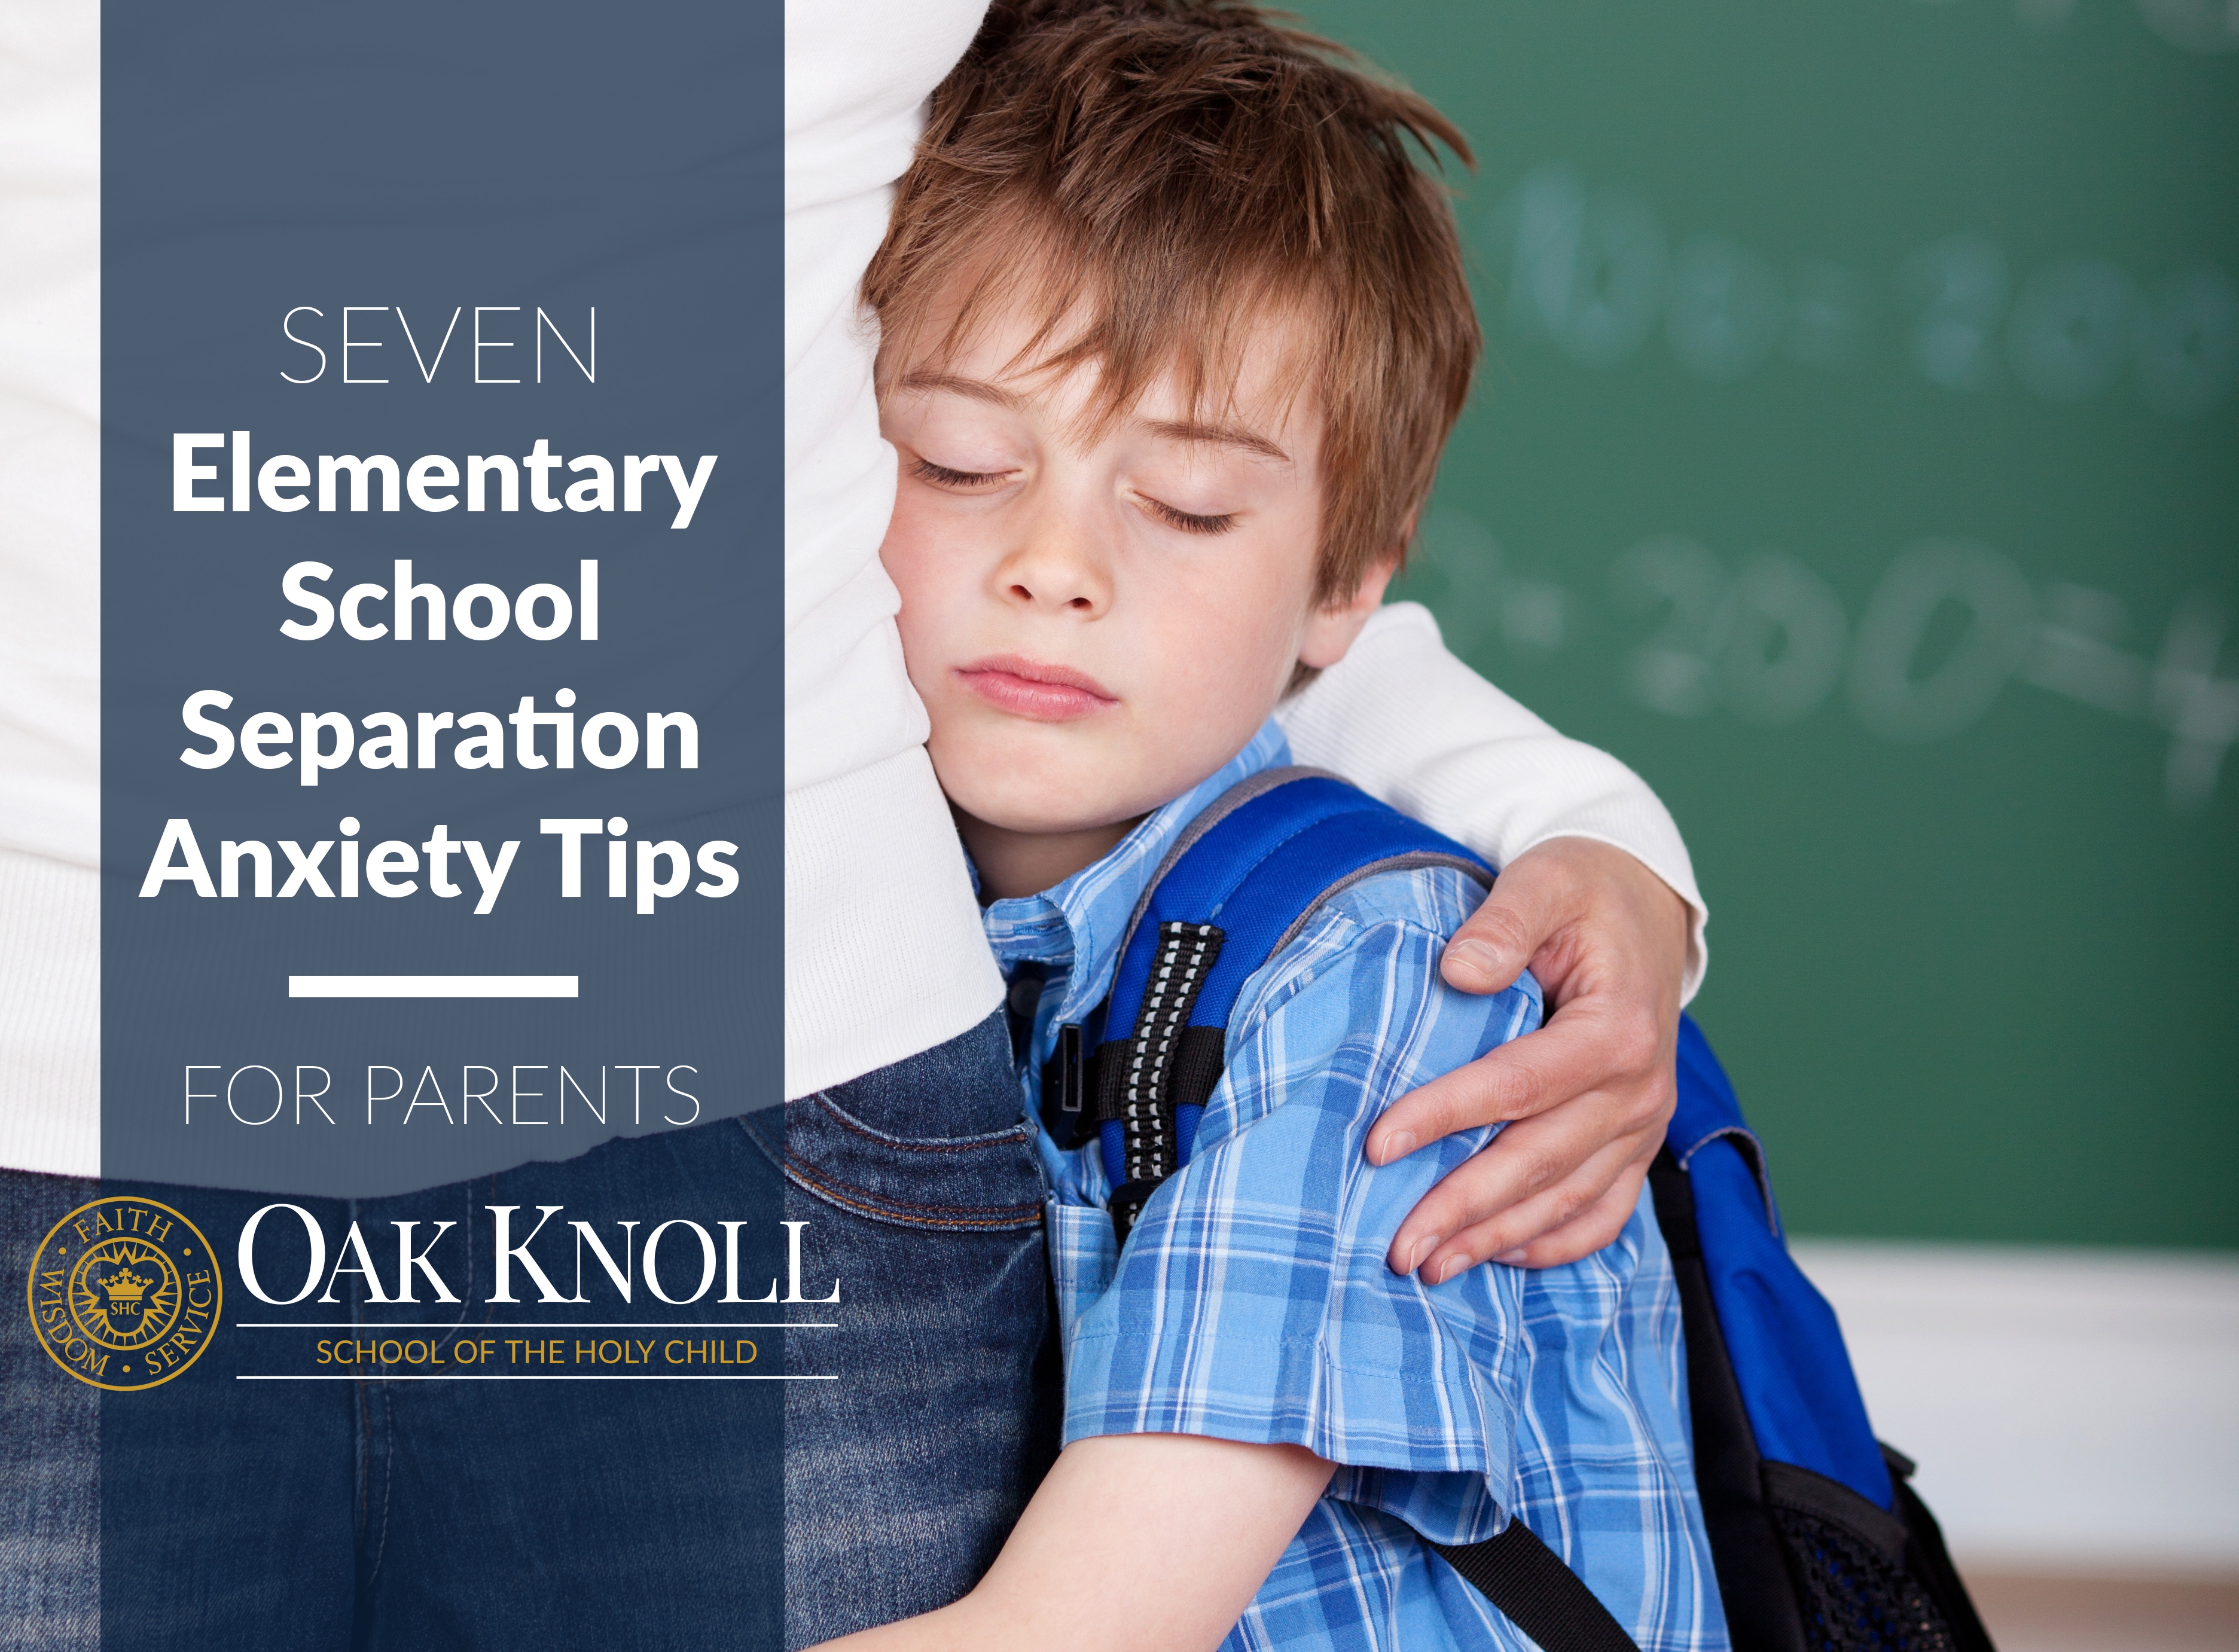 7 Elementary School Separation Anxiety Tips for Parents